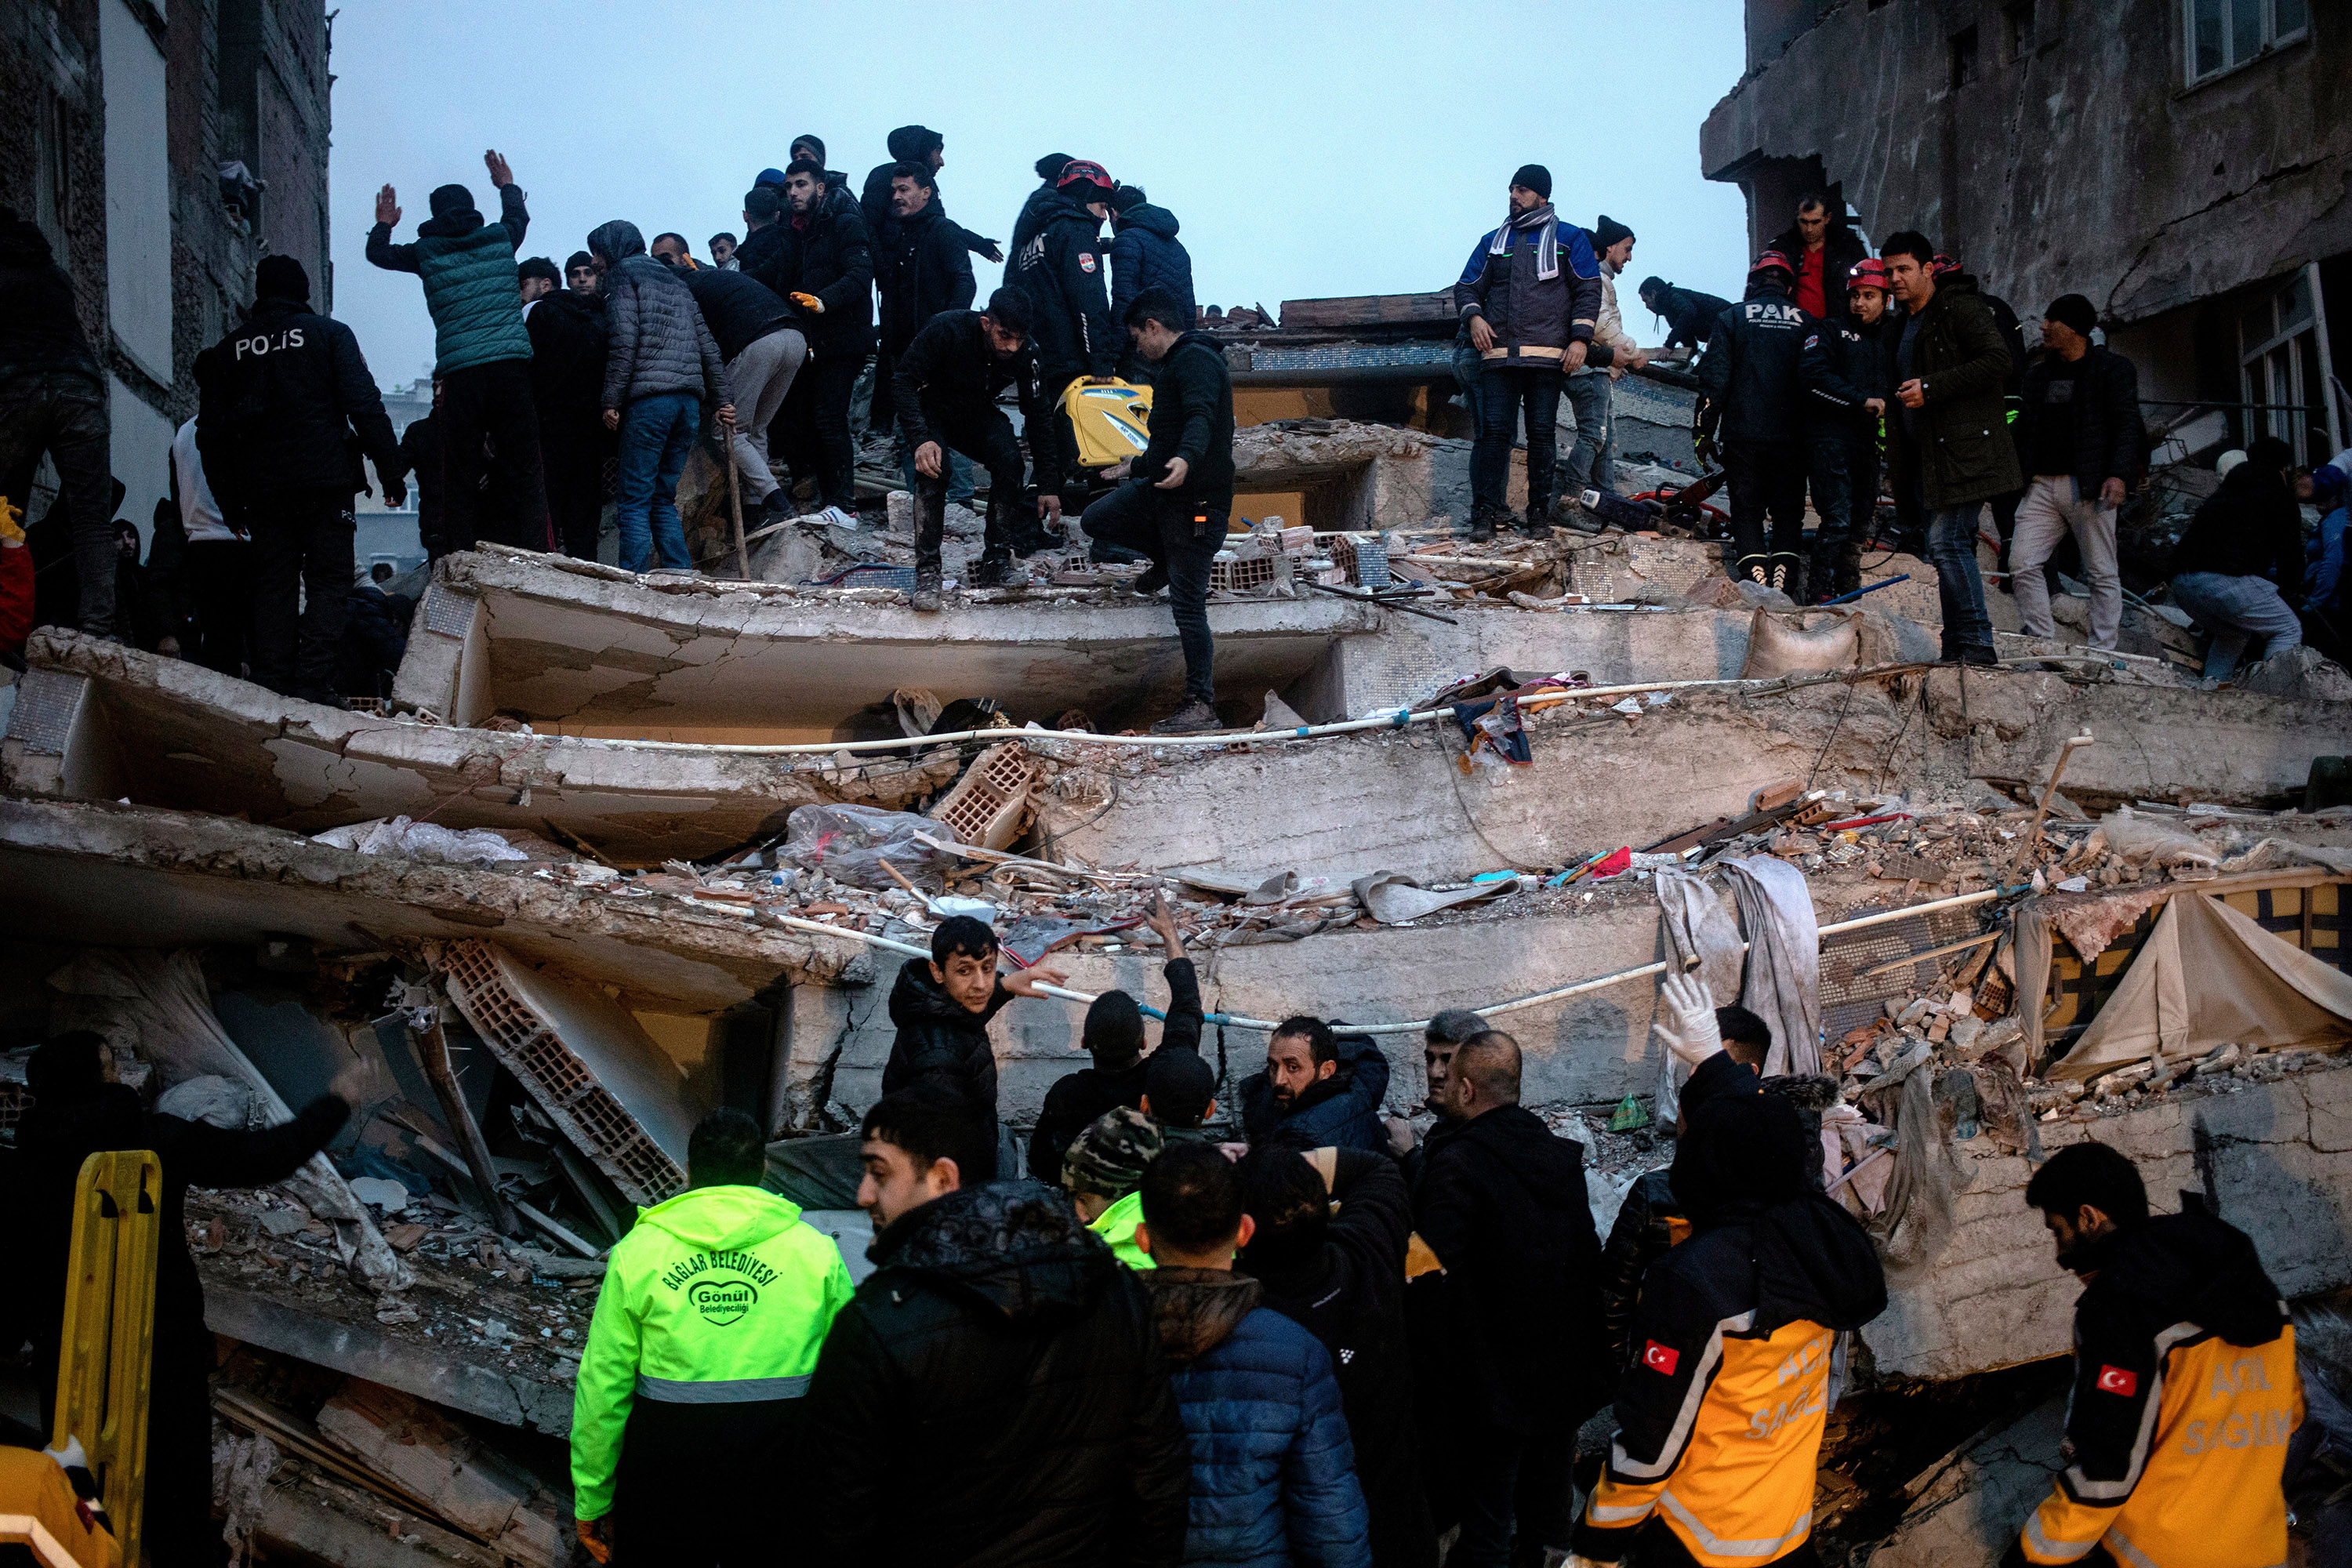 Turkish emergency personnel and others try to help victims at the site of a collapsed building after an earthquake in Diyarbakir, Turkey on February 6.